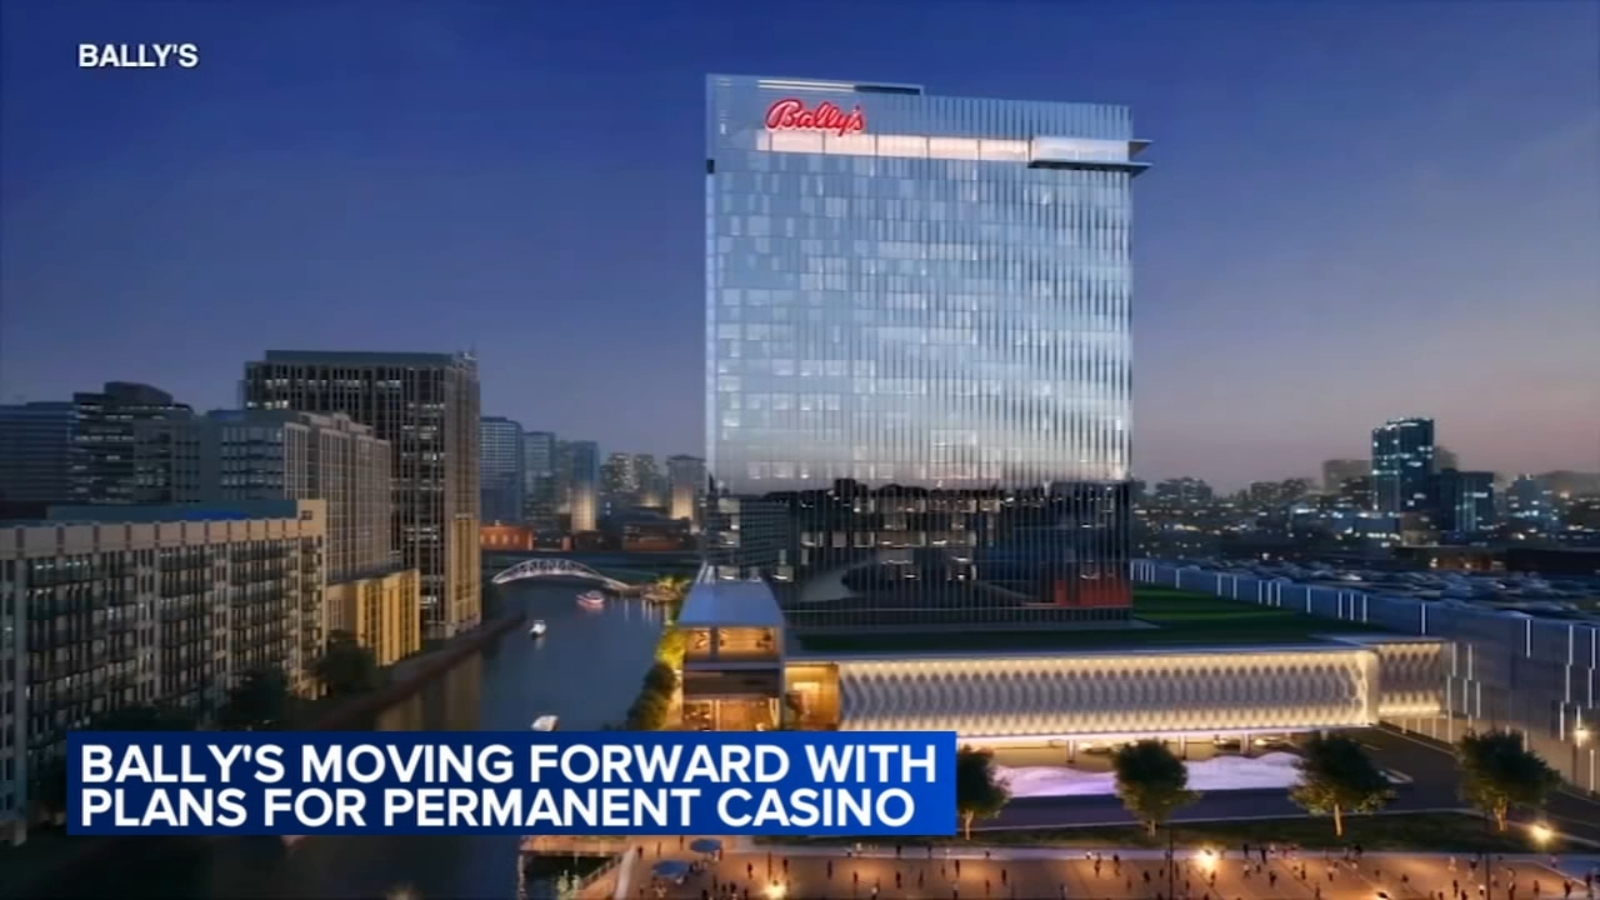 Bally’s Casino moving ahead with plans for permanent River North, Chicago casino at Chicago Tribune publishing facility [Video]